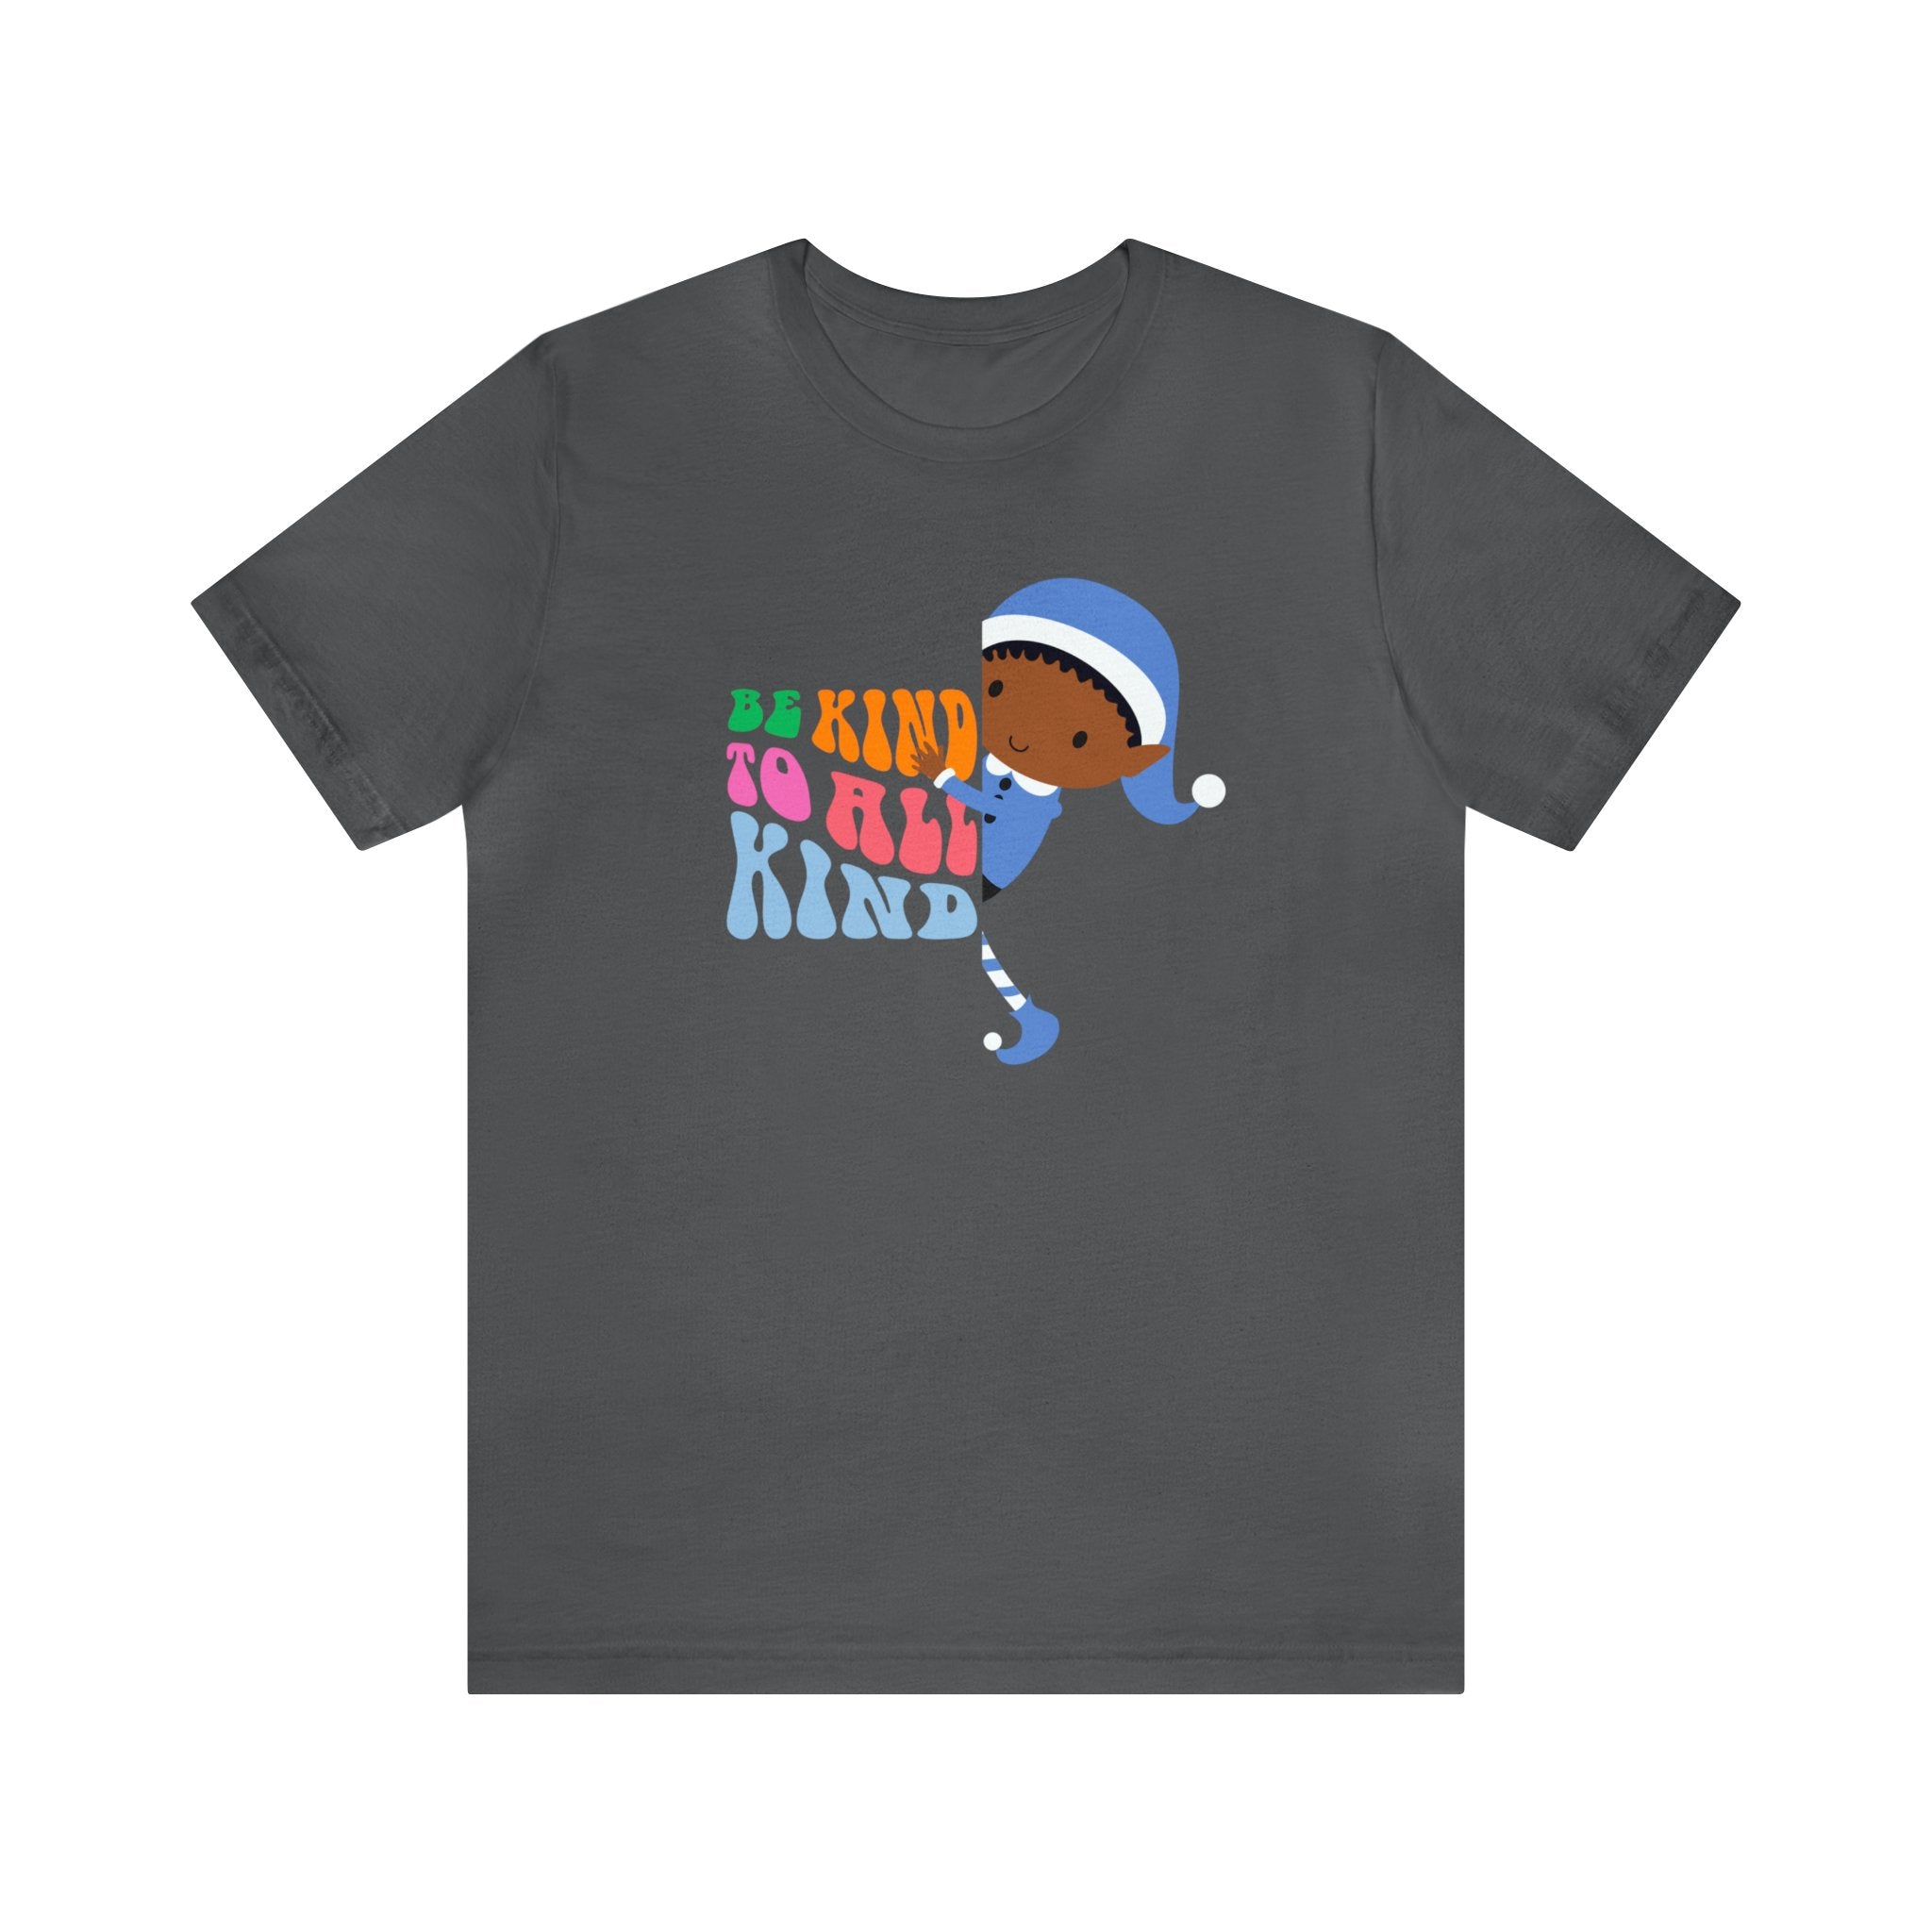 Be Kind To All Kind : Unisex 100% Comfy Cotton, T-Shirt by Bella+Canvas